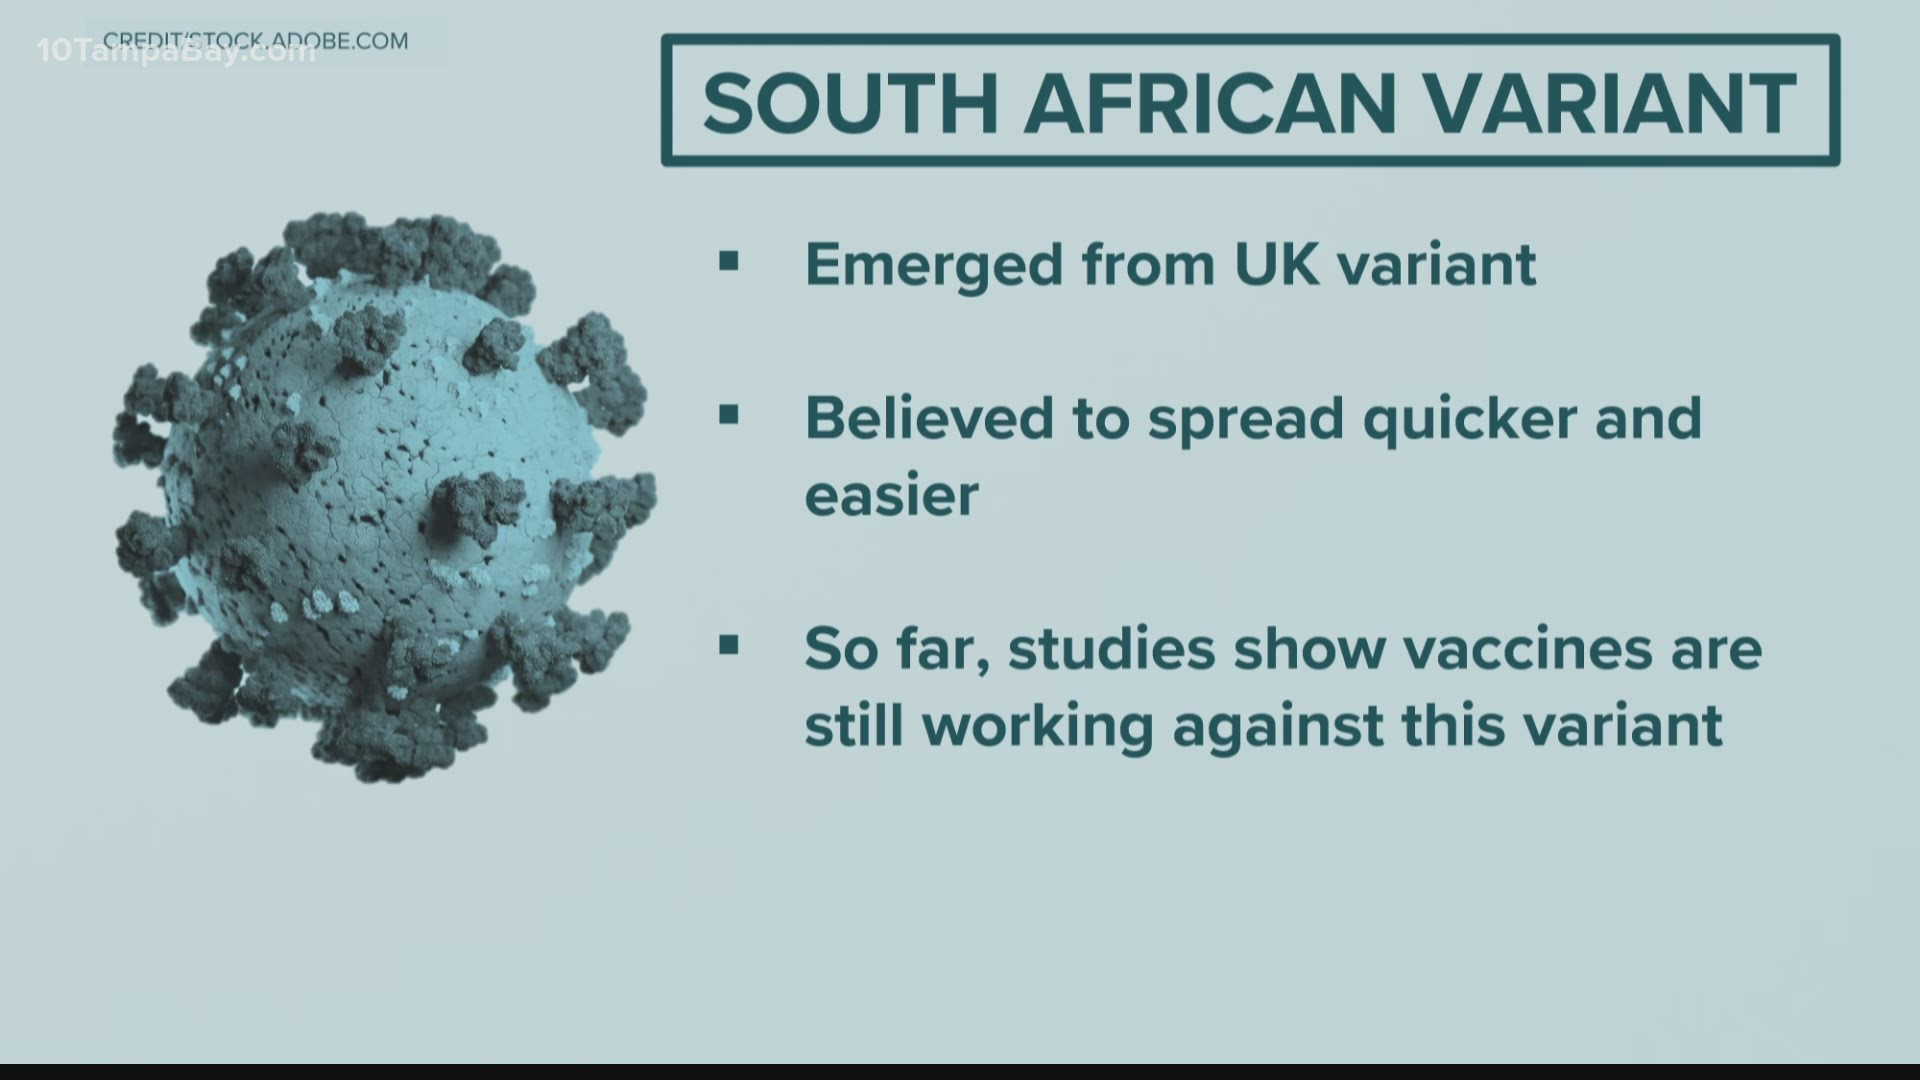 At least one case of the South African COVID-19 variant has been discovered in Florida.